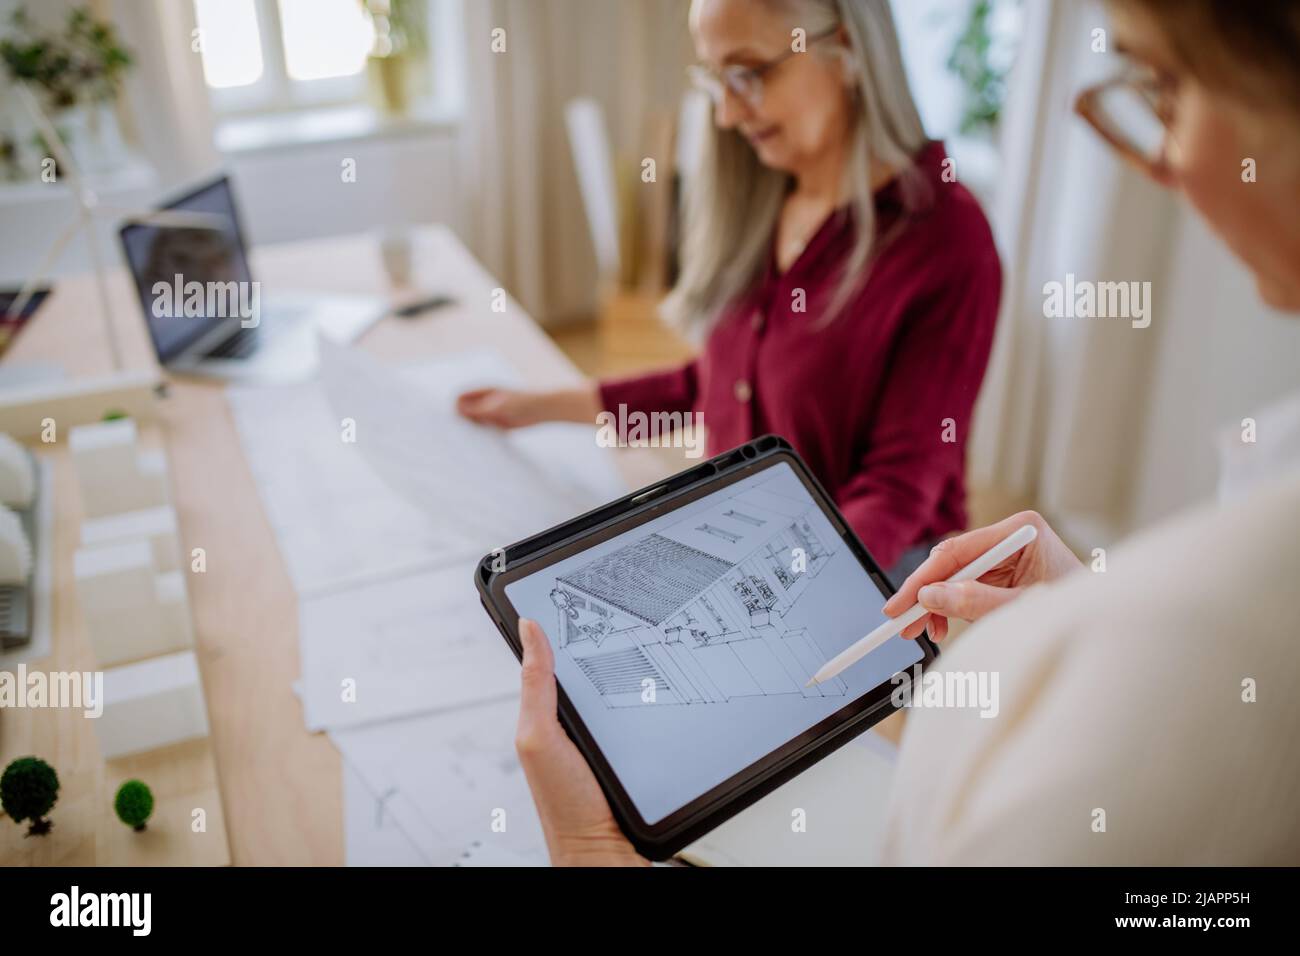 Mature women eco architects with blueprints working on tablet together in office. Stock Photo